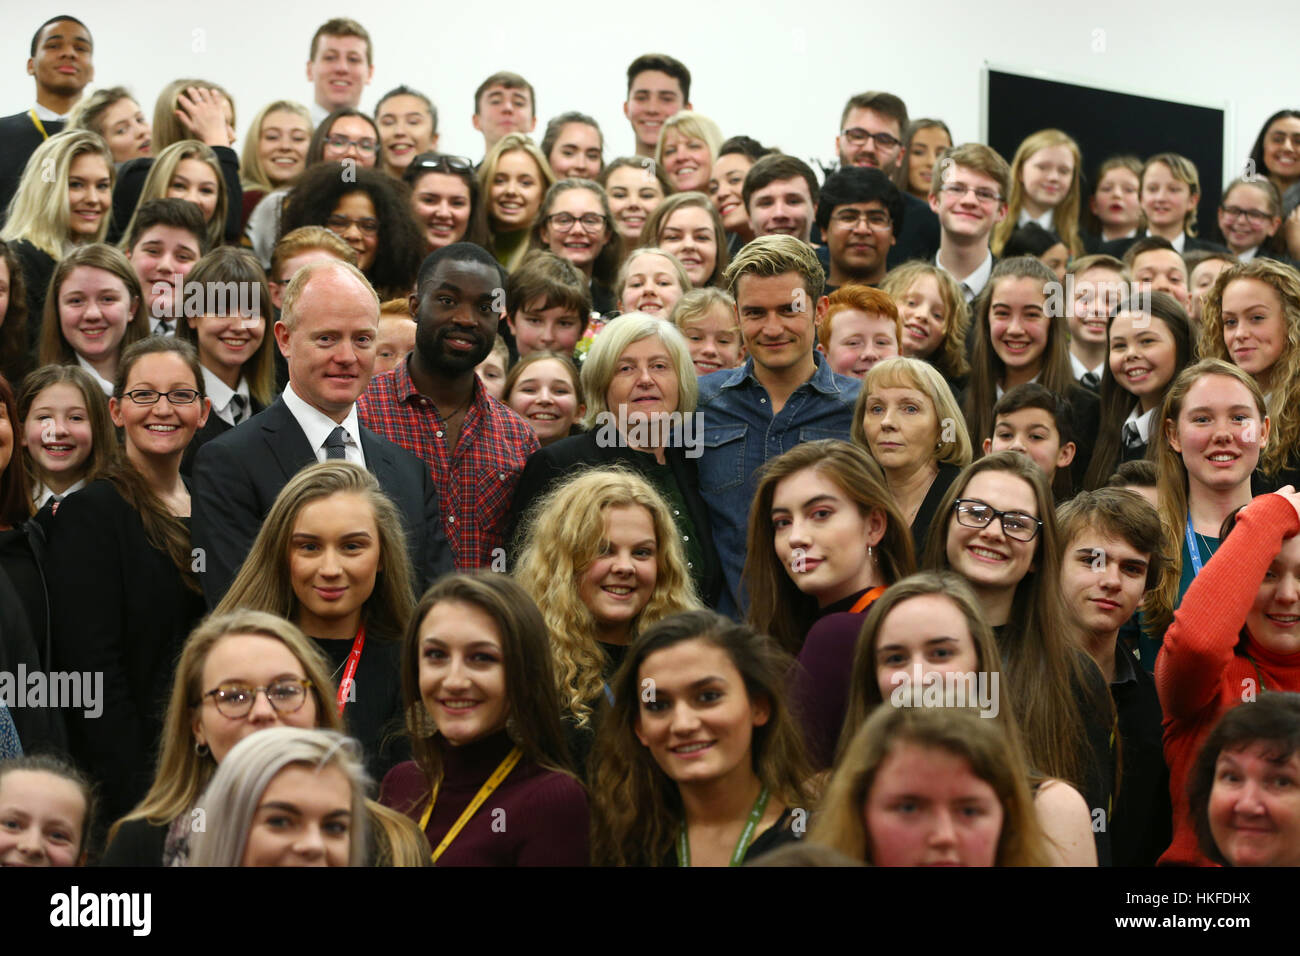 Orlando Bloom and Paapa Essiedu and Patsy Rodenburg whilst attending the Laurus Trust launch held at Cheadle Hulme High School, Cheadle Hulme, Cheadle. The Trust has co-created its own Curriculum with Patsy Rodenburg, and two of her former pupils - Orlando Bloom and Paapa Essiedu - who are helping run workshops along with the Royal Shakespeare Company - showcasing the ethos and type of work that will be embedded in Laurus Trust schools. Stock Photo